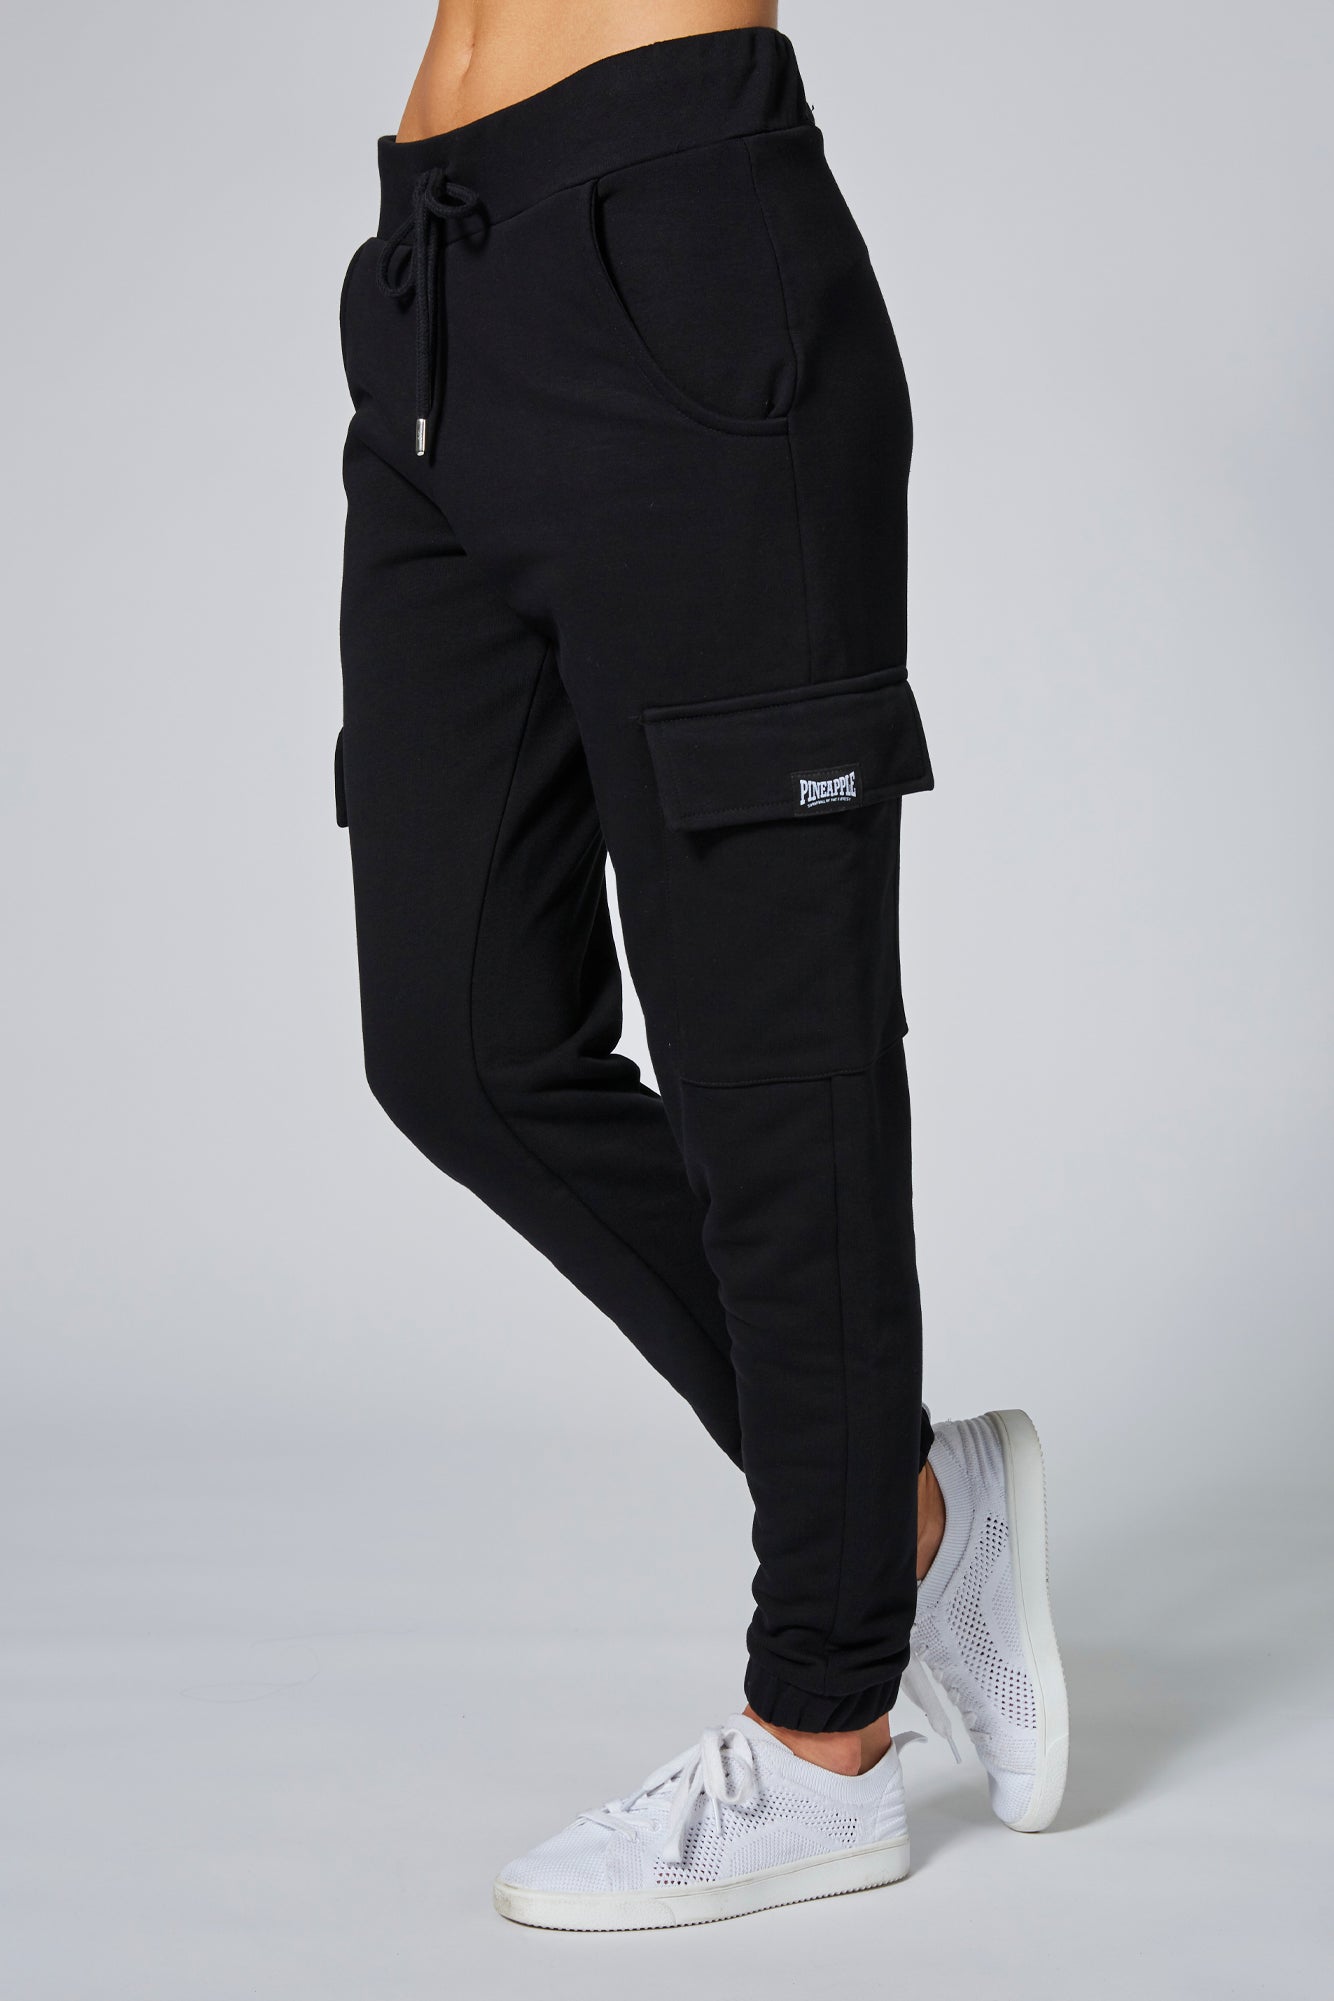 Buy Black Combat Pants from the Pineapple online store